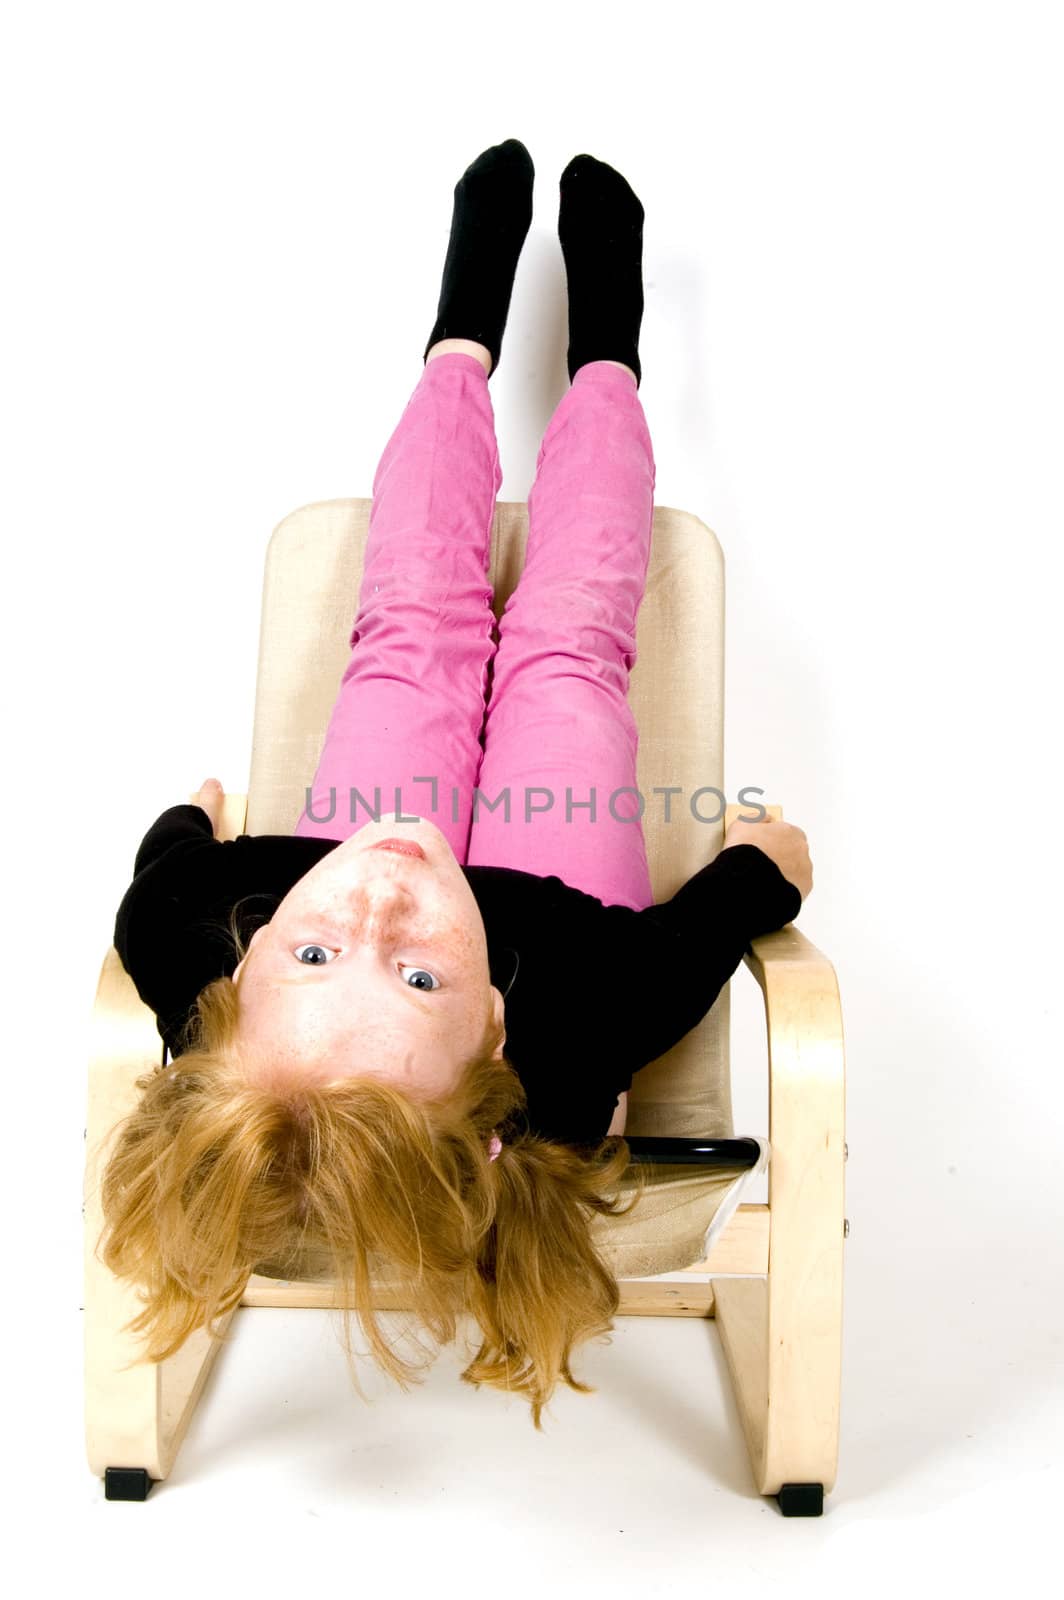 little girl is hanging upsite down on a chair